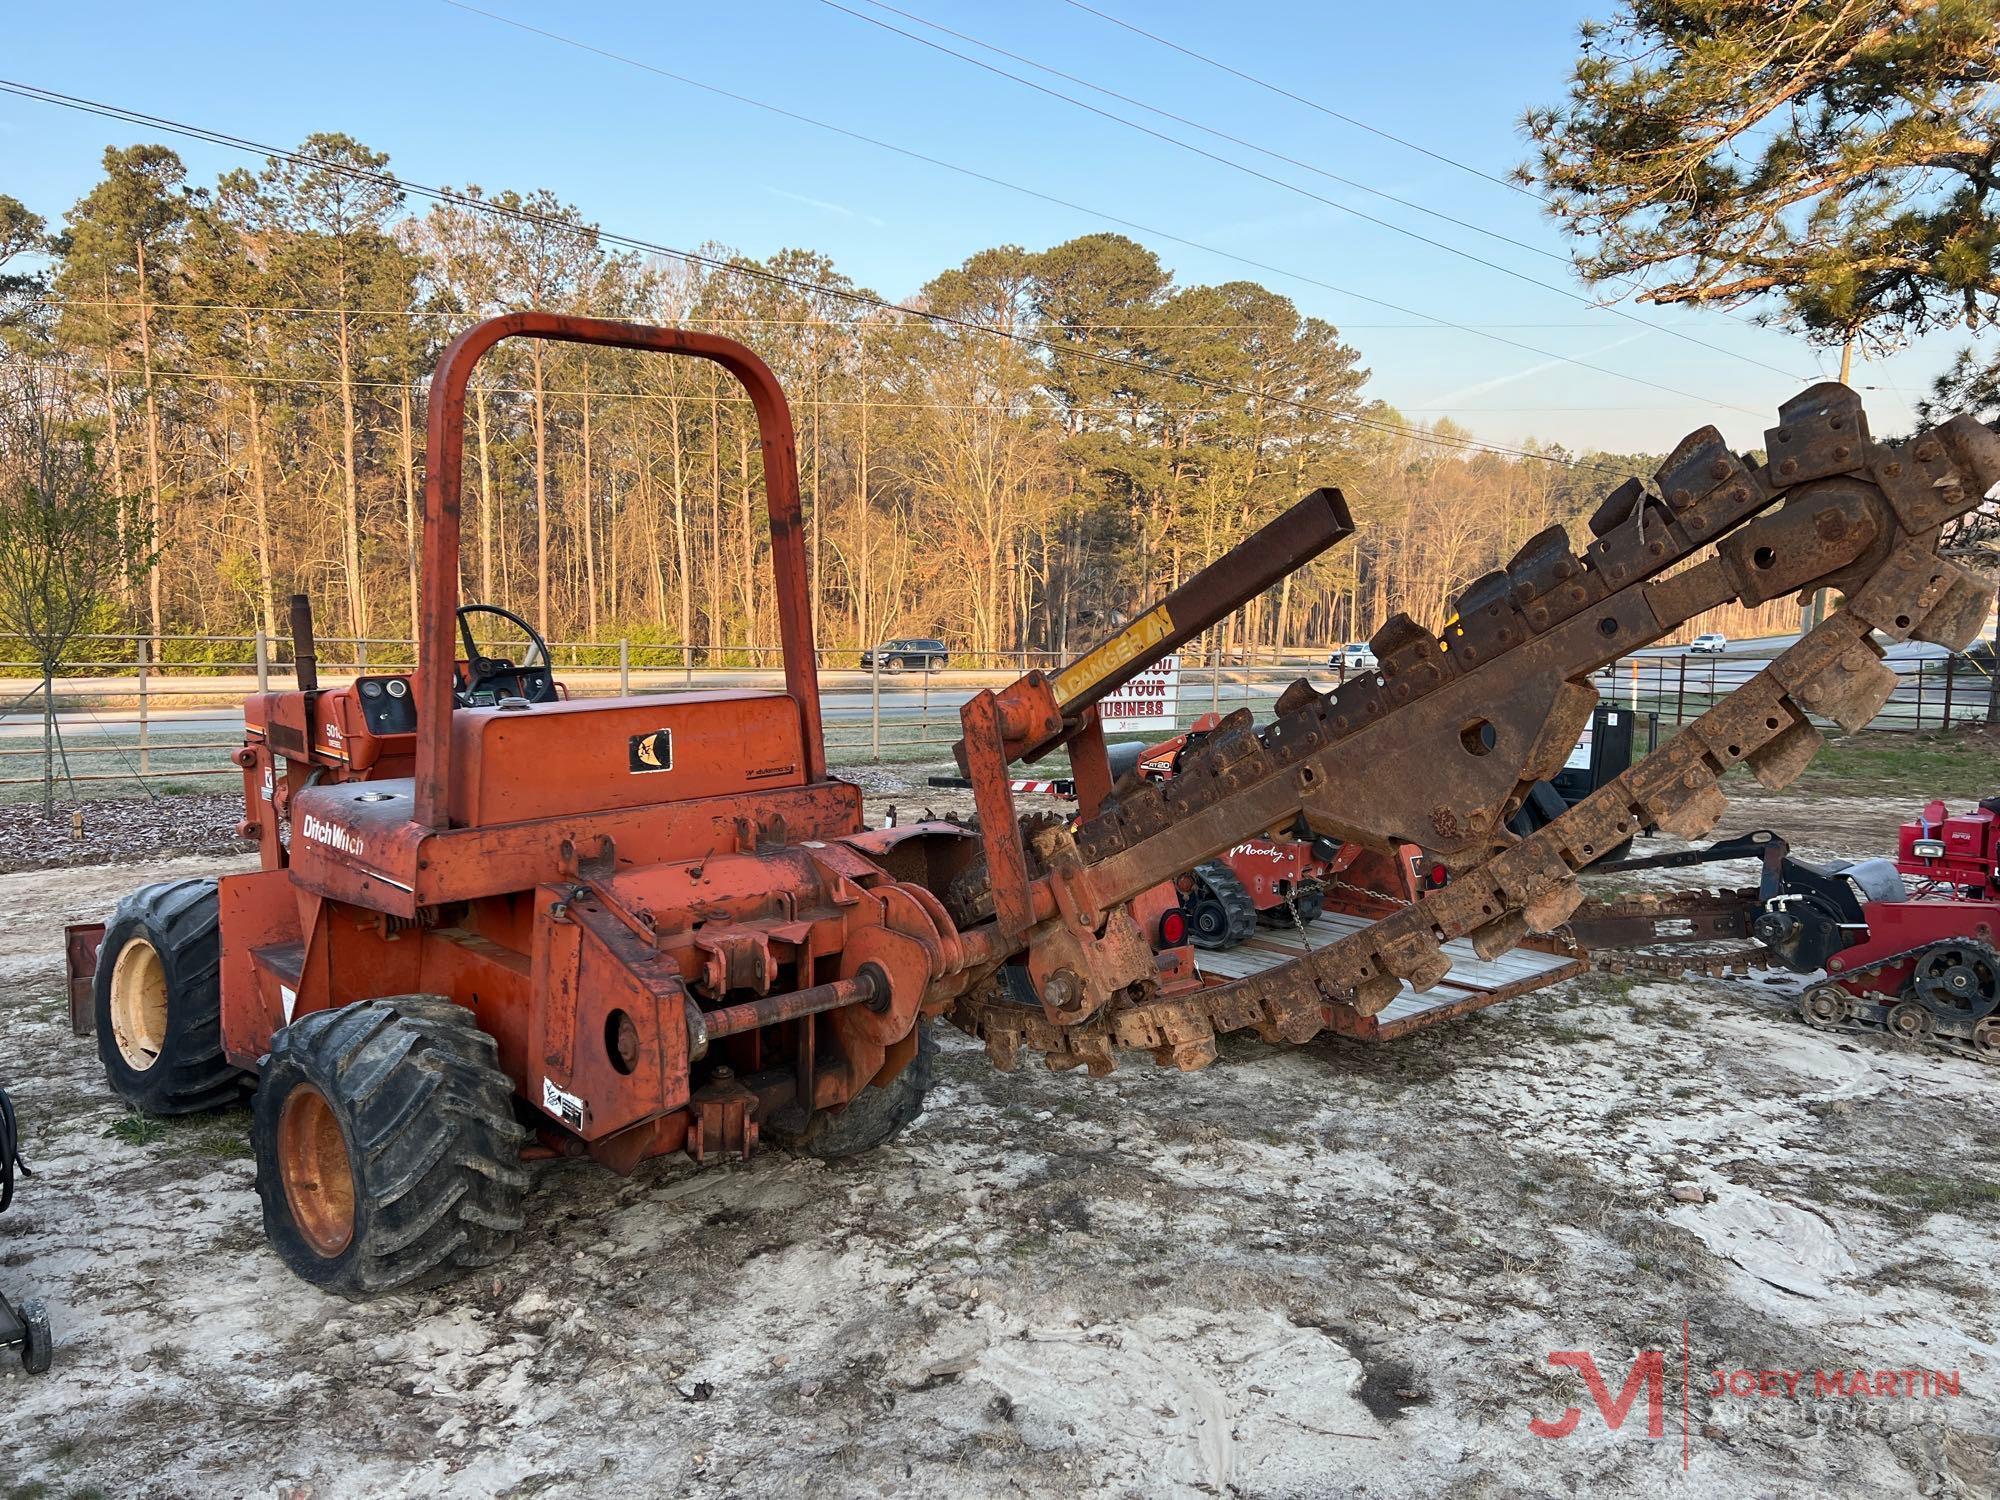 DITCH WITCH 5010 RIDE ON TRENCHER